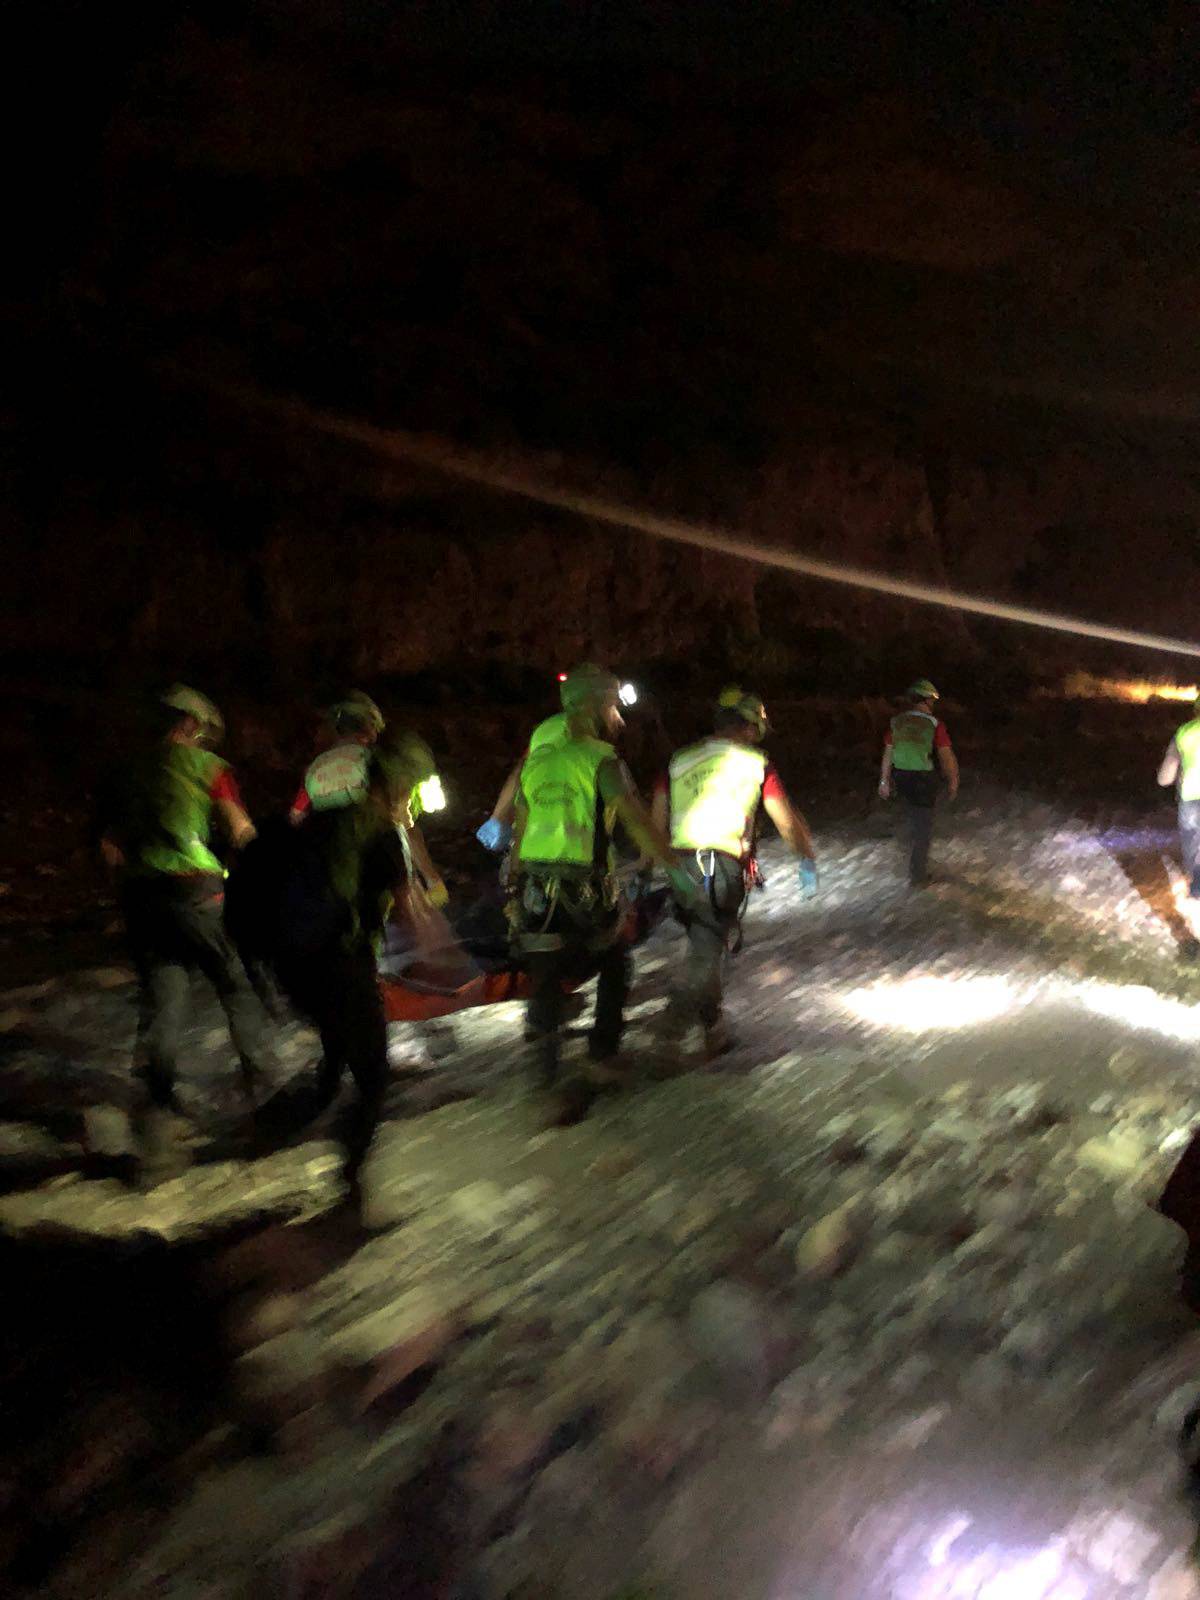 Alpine rescue workers carry a body after several people were killed in a mountain gorge flooding, in the municipality of Civita